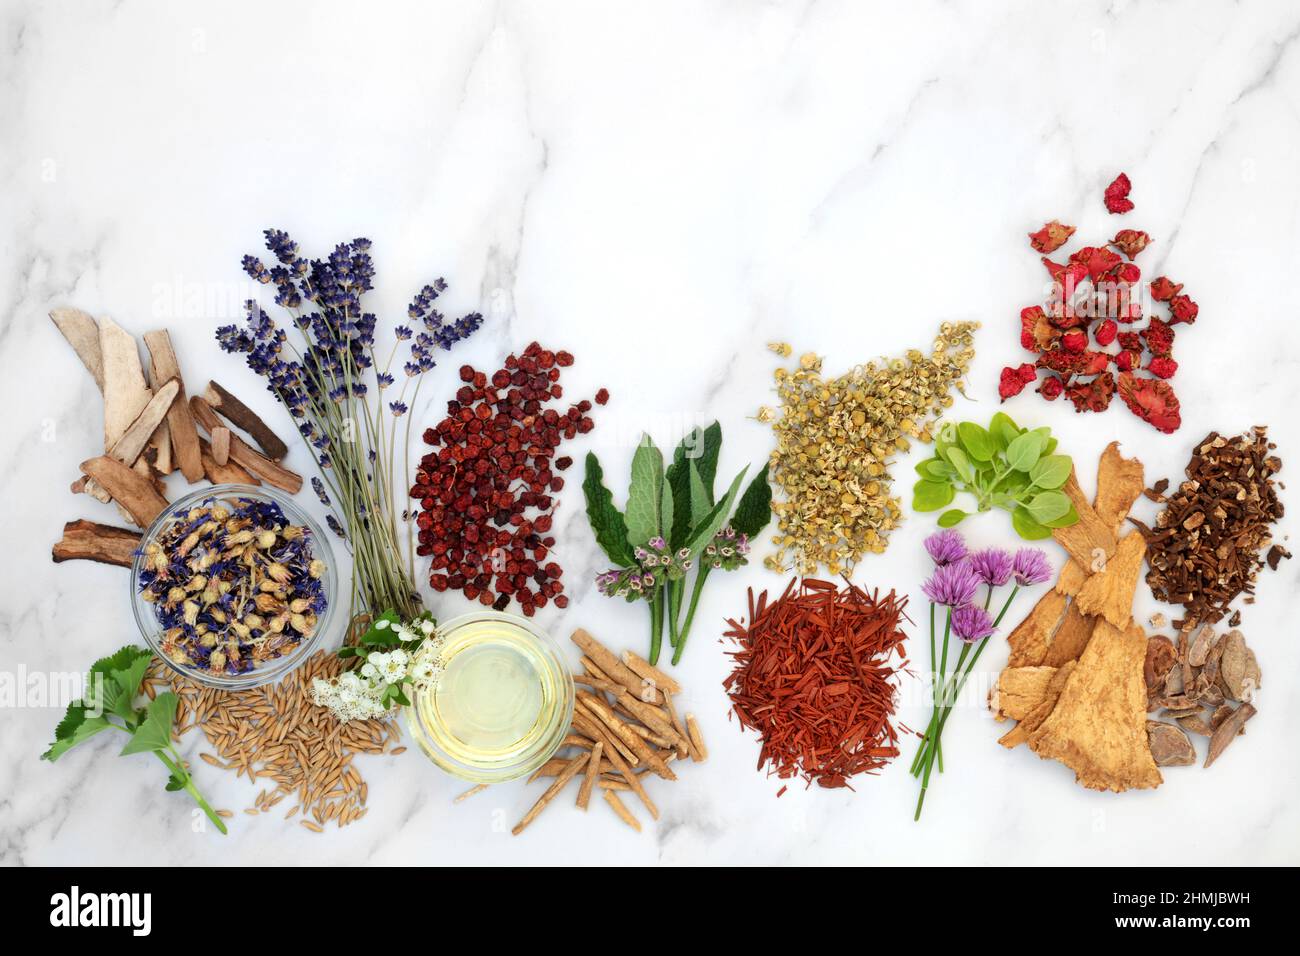 Natural healing herbs and flowers used in herbal plant medicine. Alternative floral nature health care concept. Top view, flat lay on marble. Stock Photo